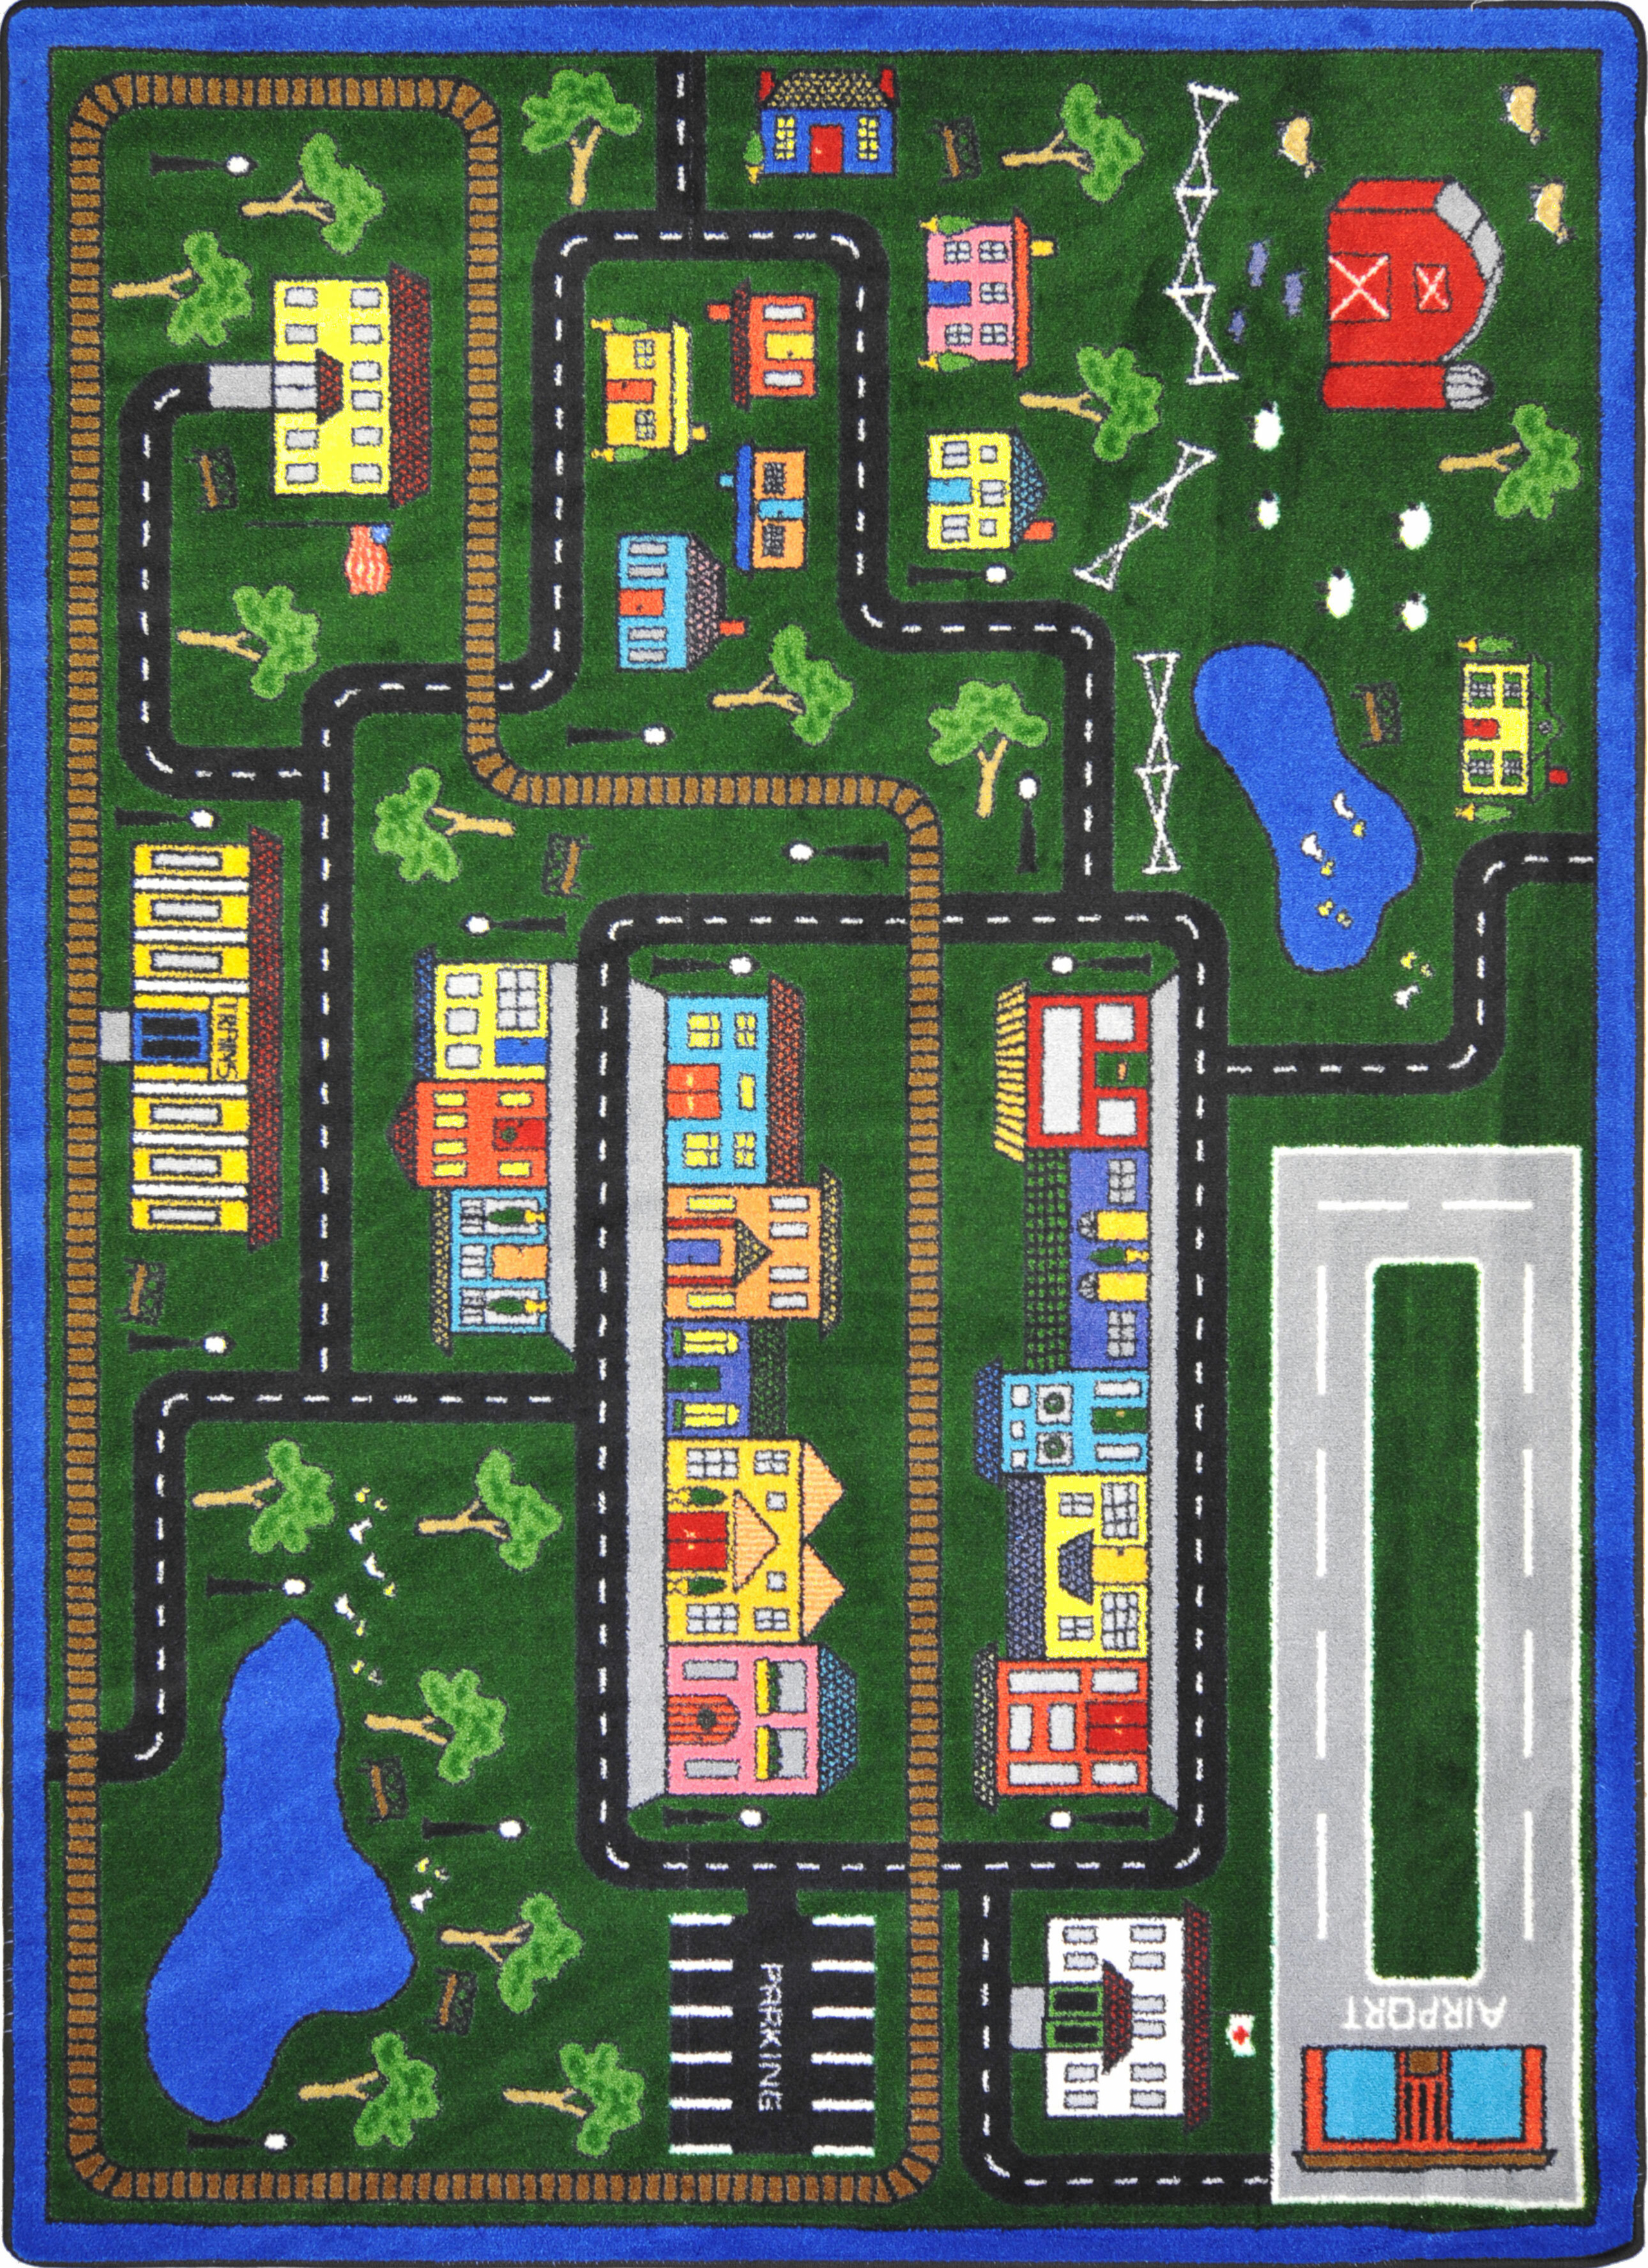 This design incorporates all aspects of everyday life agricultural suburban